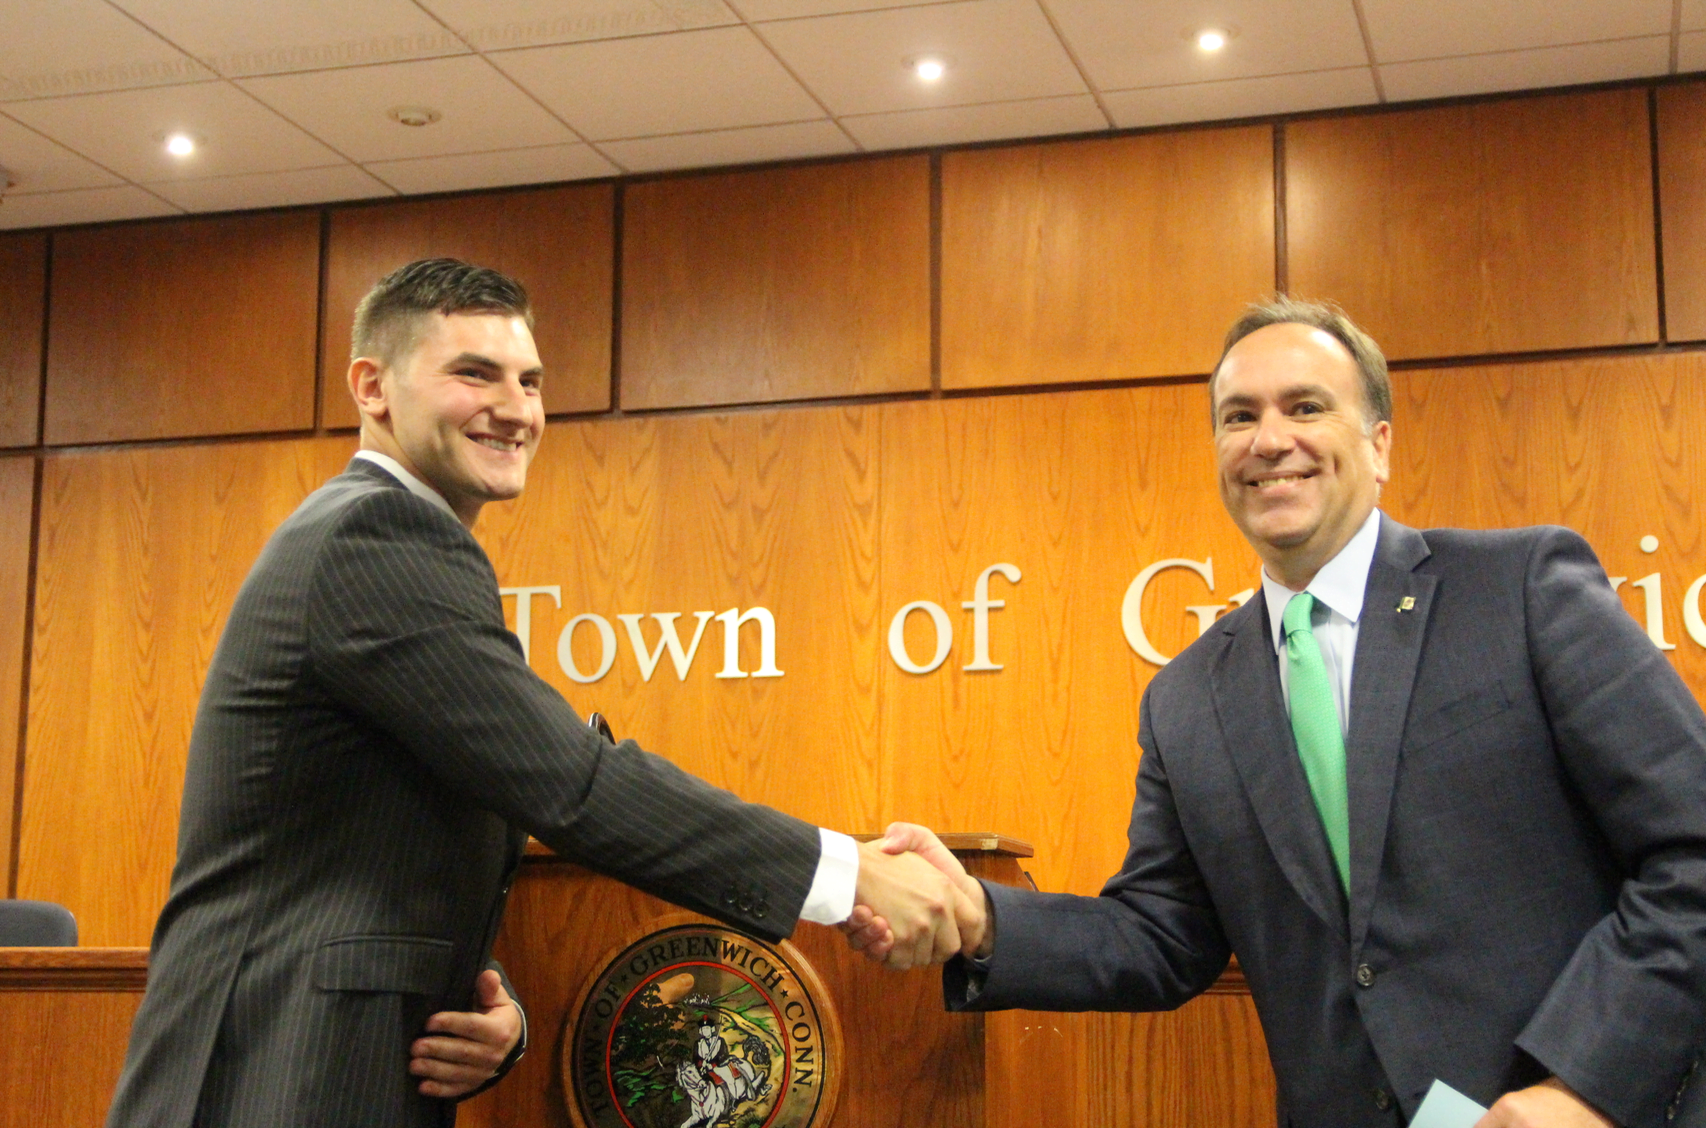 Newly sworn in Greenwich Police Officer Michael Bellairs II is congratulated by the Police Commissioner, First Selectman Peter Tesei. July 25, 2019 Photo: Leslie Yager